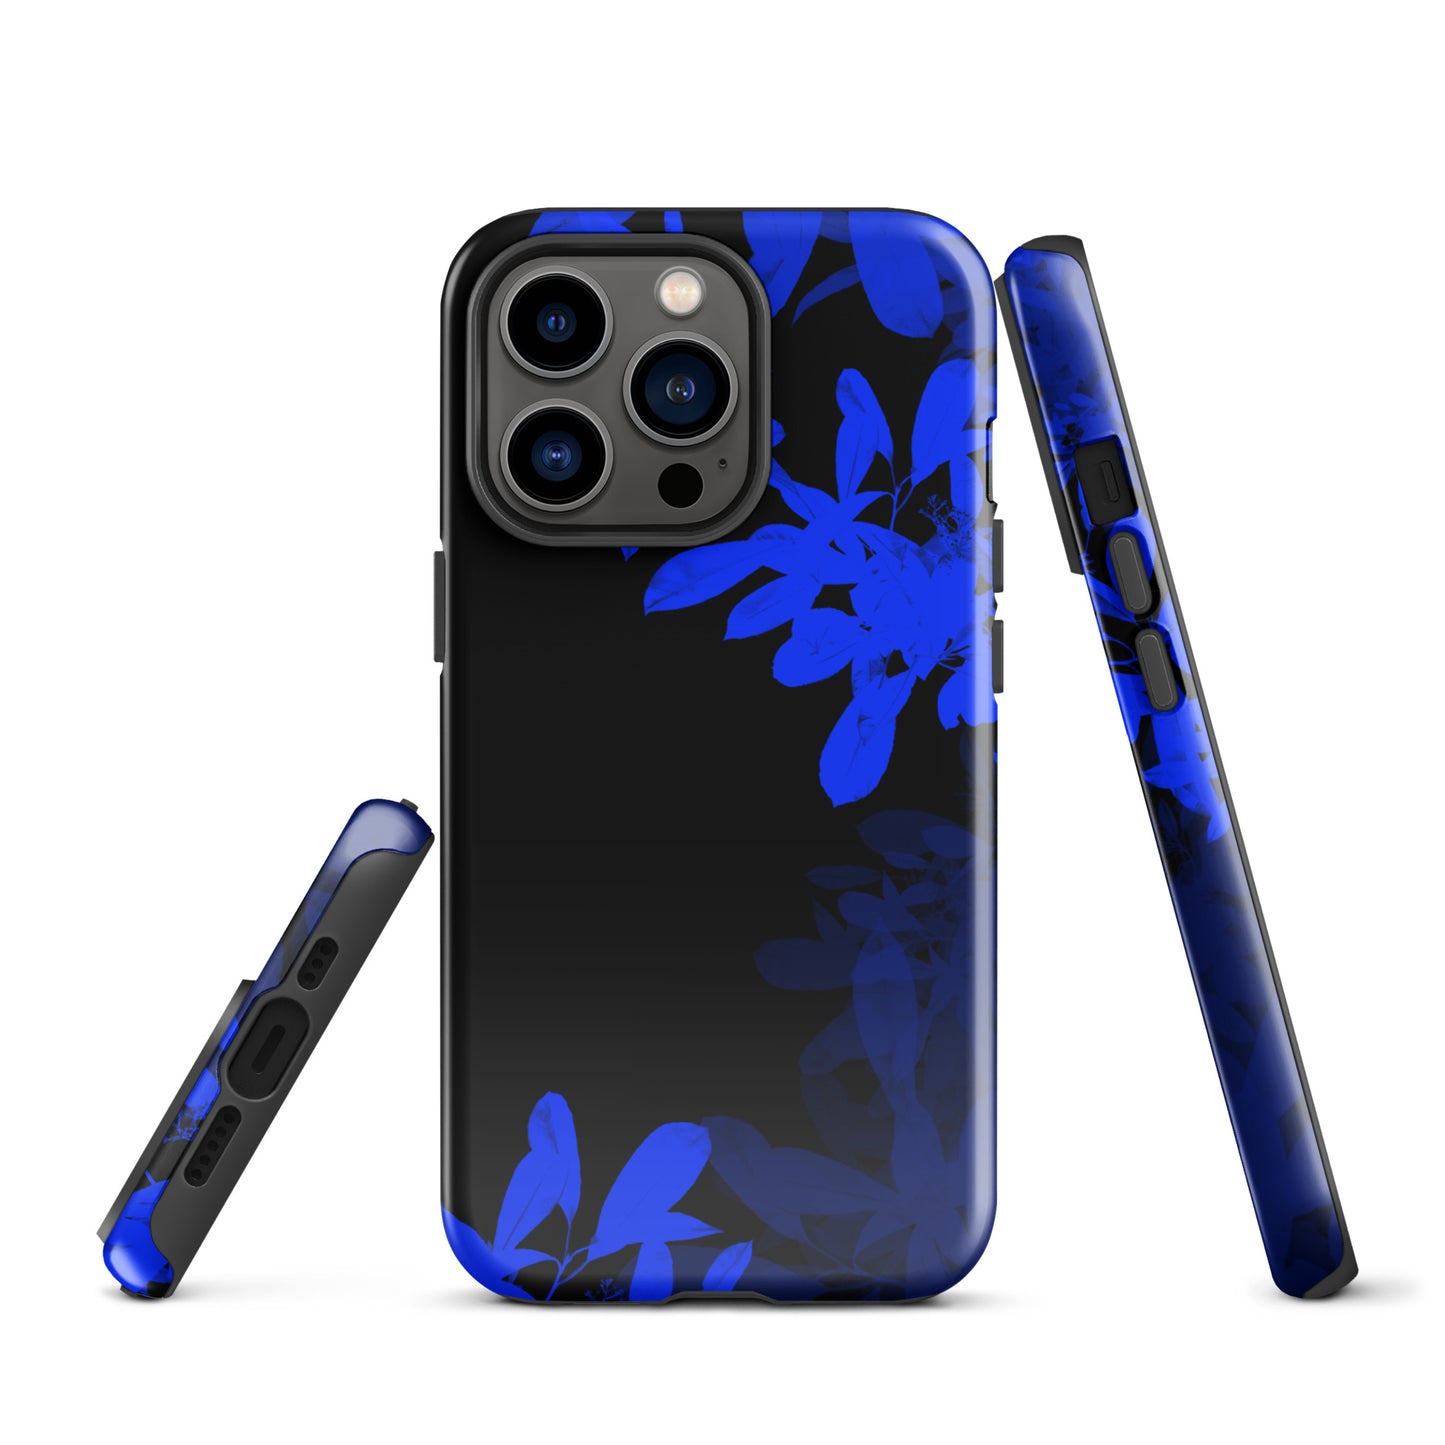 A Night Blue Plant Case for the iPhone 13 Pro 